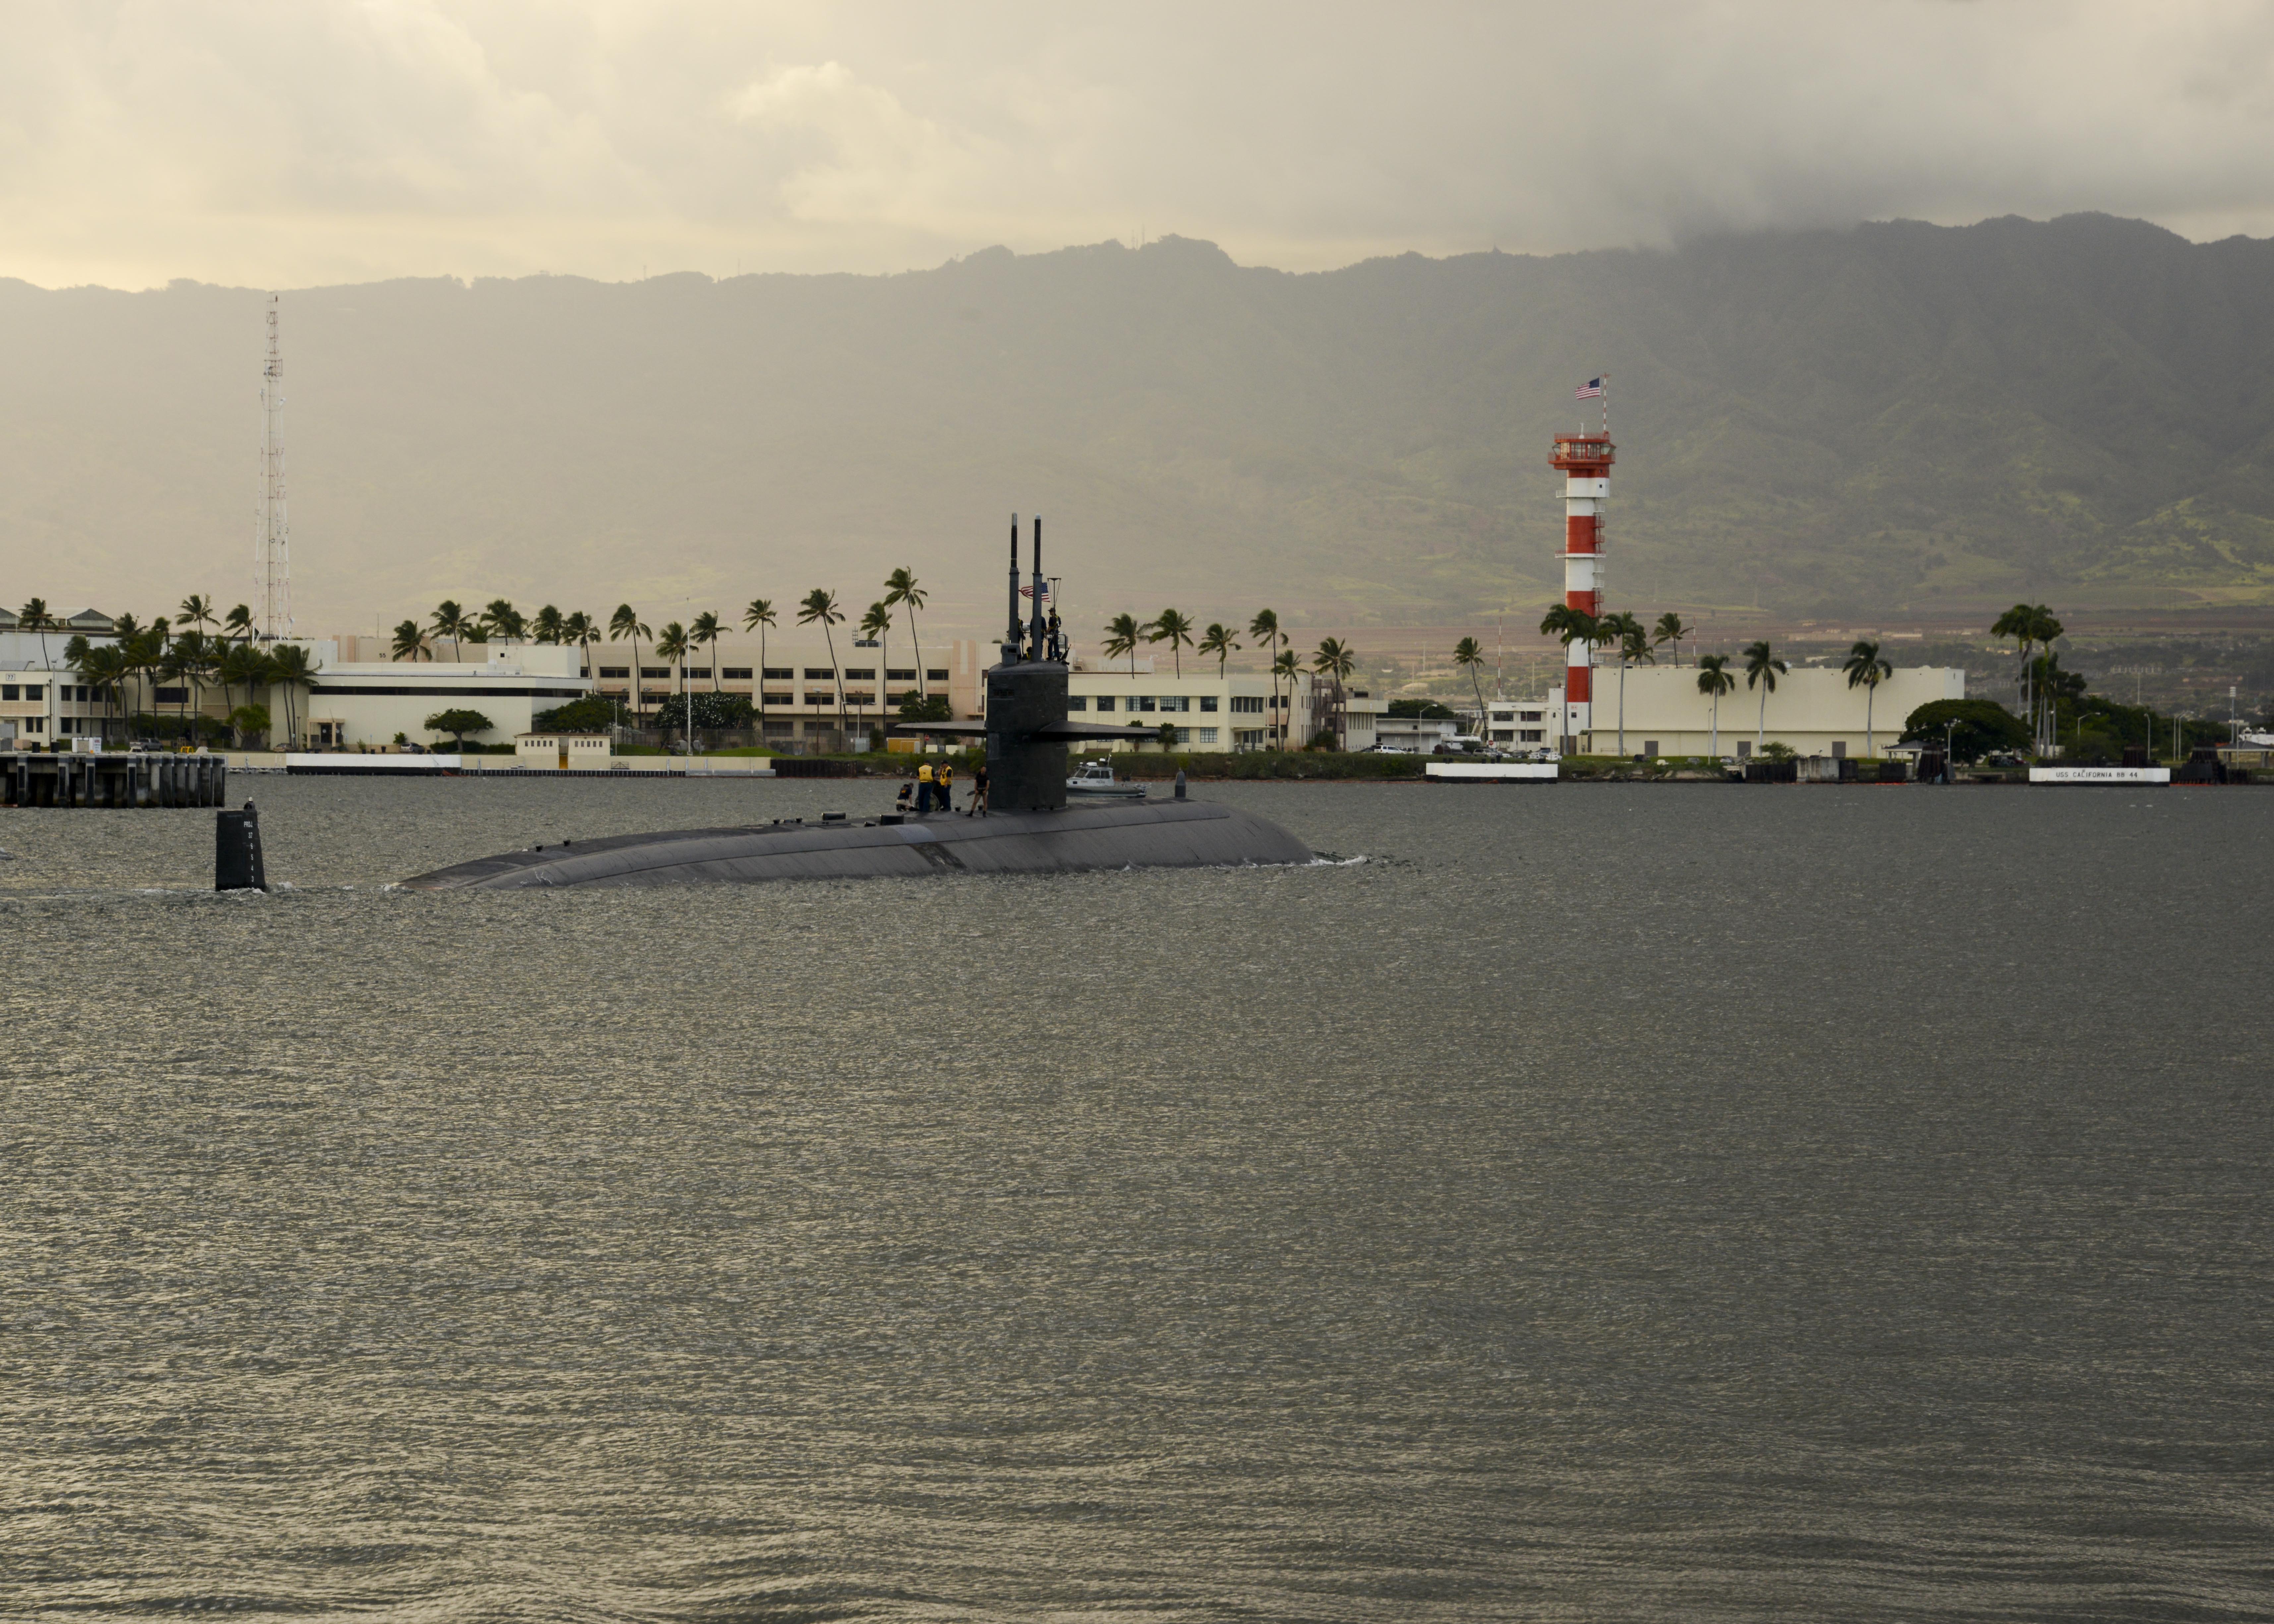 The Los Angeles-class fast attack submarine USS La Jolla (SSN 701) departs the submarine piers at Joint Base Pearl Harbor-Hickam for the last time on Oct. 15, 2014. US Navy photo.